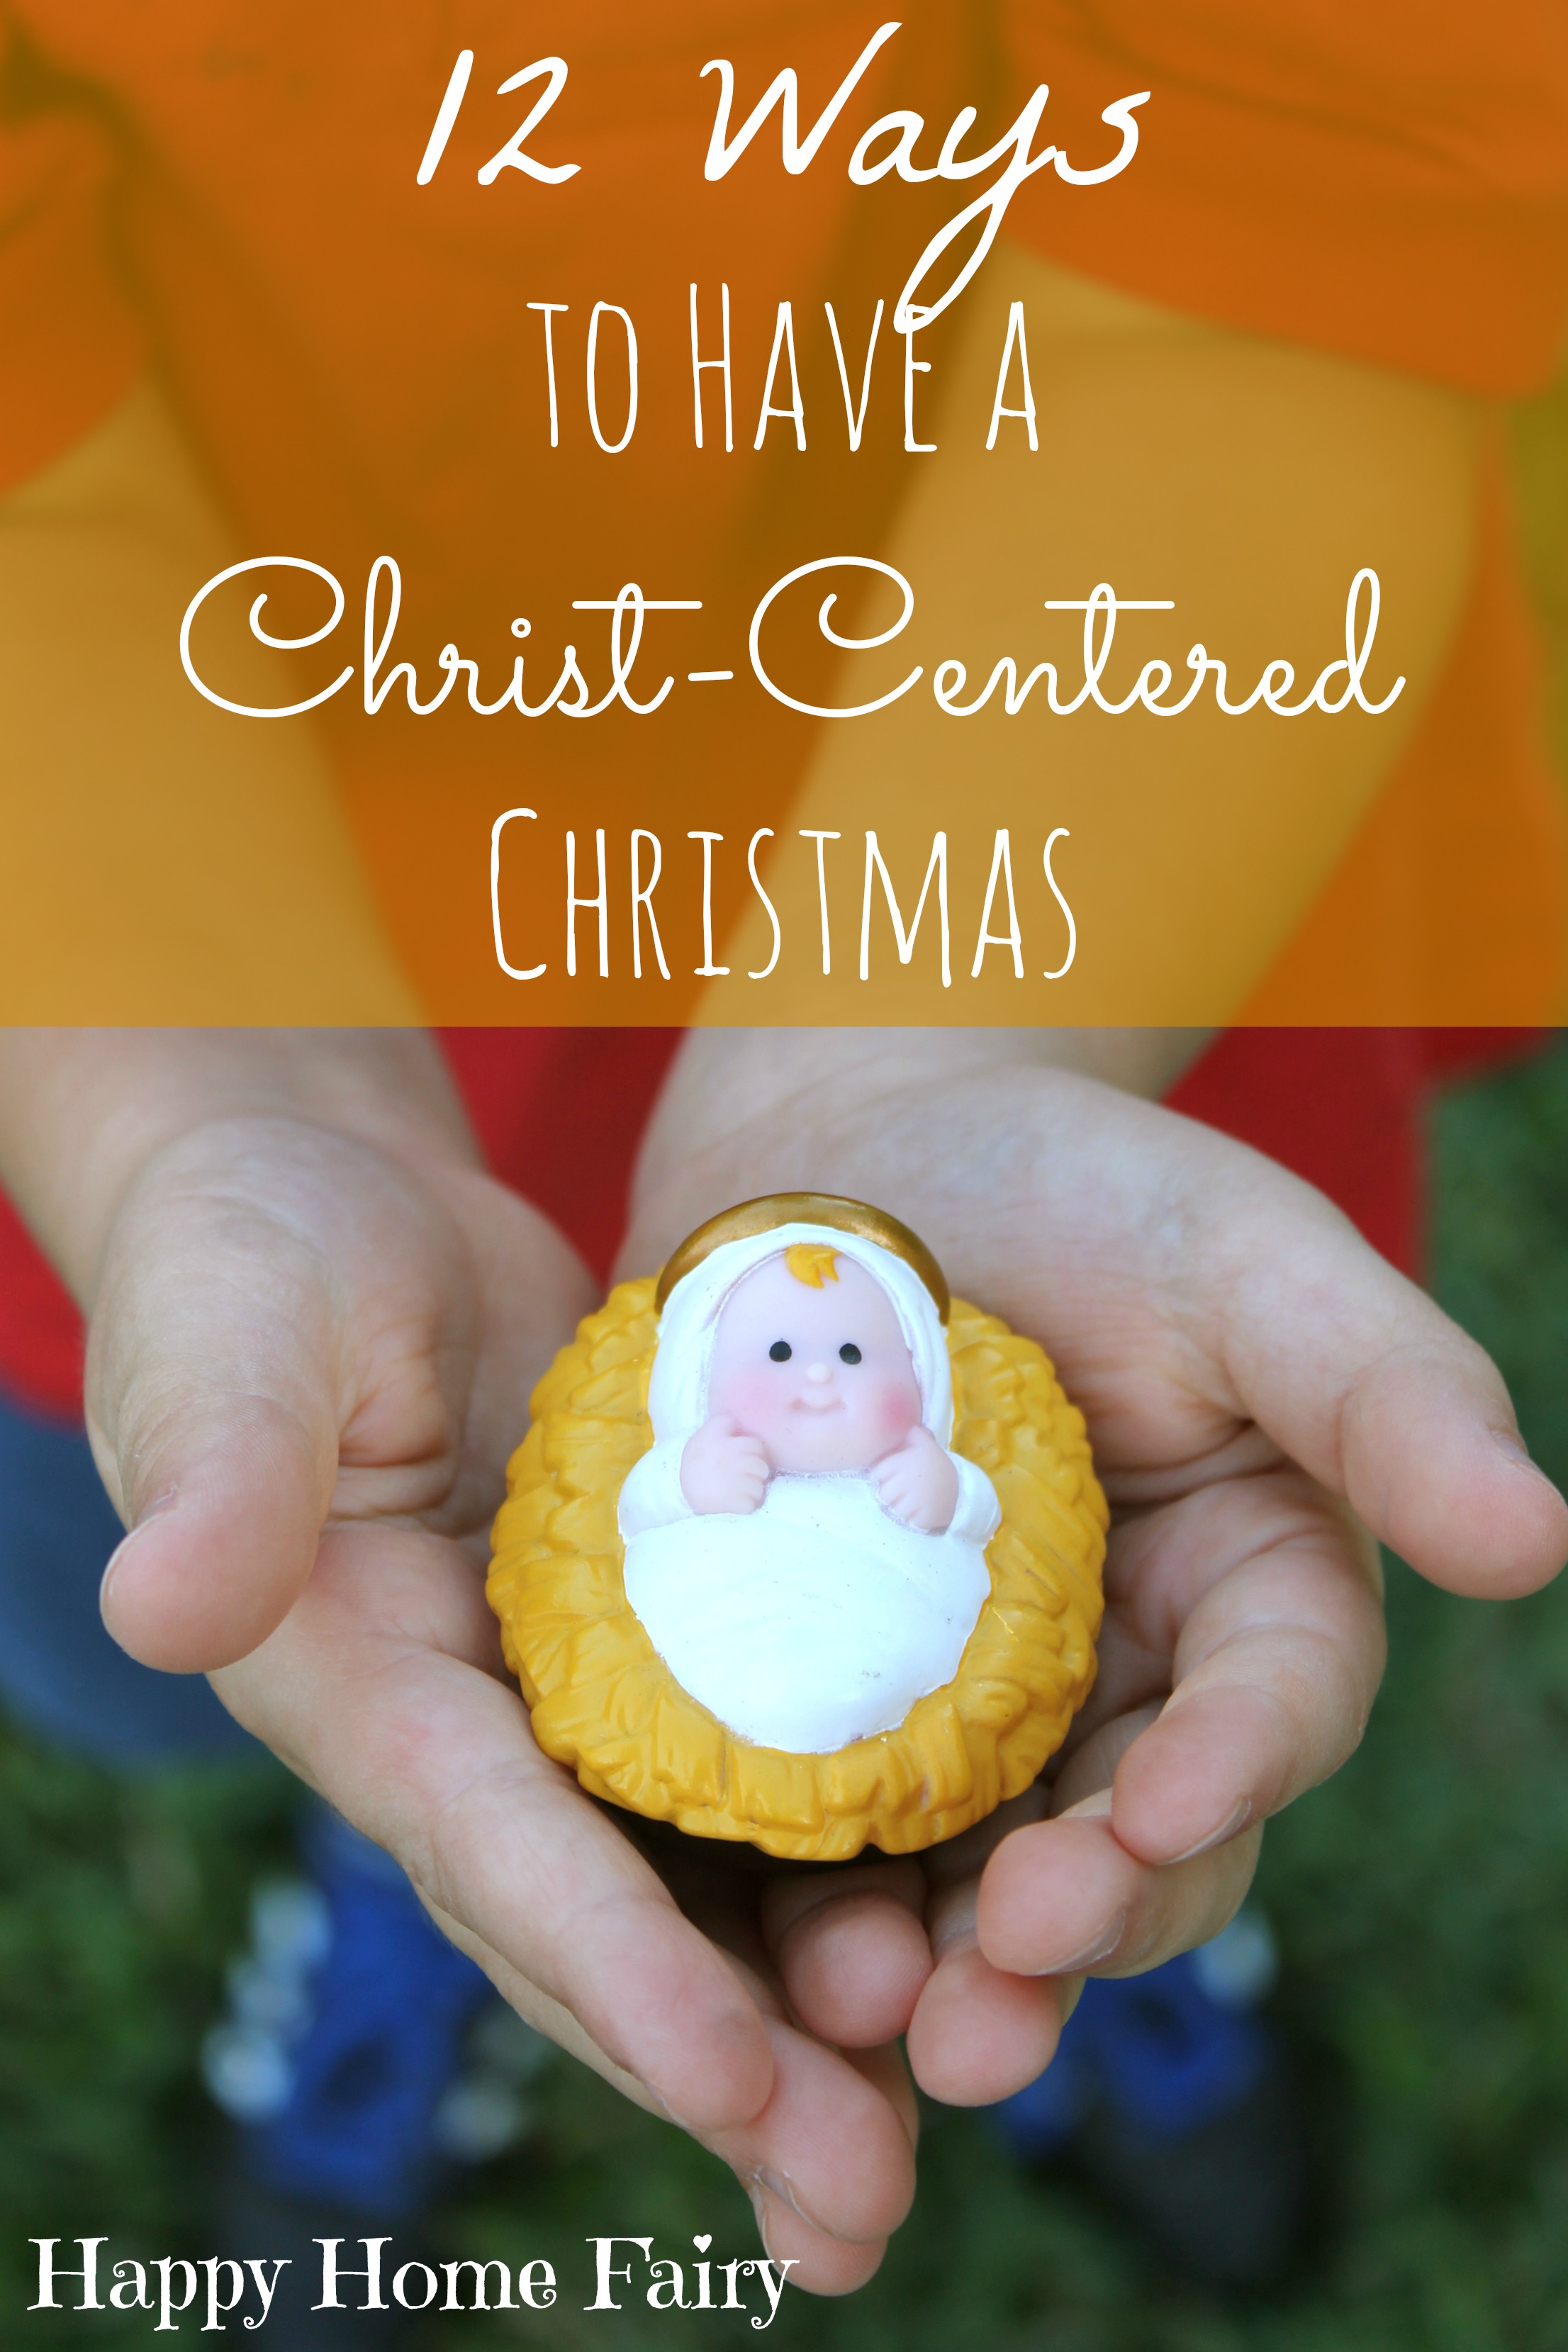 12-ways-to-have-a-christ-centered-christmas-happy-home-fairy